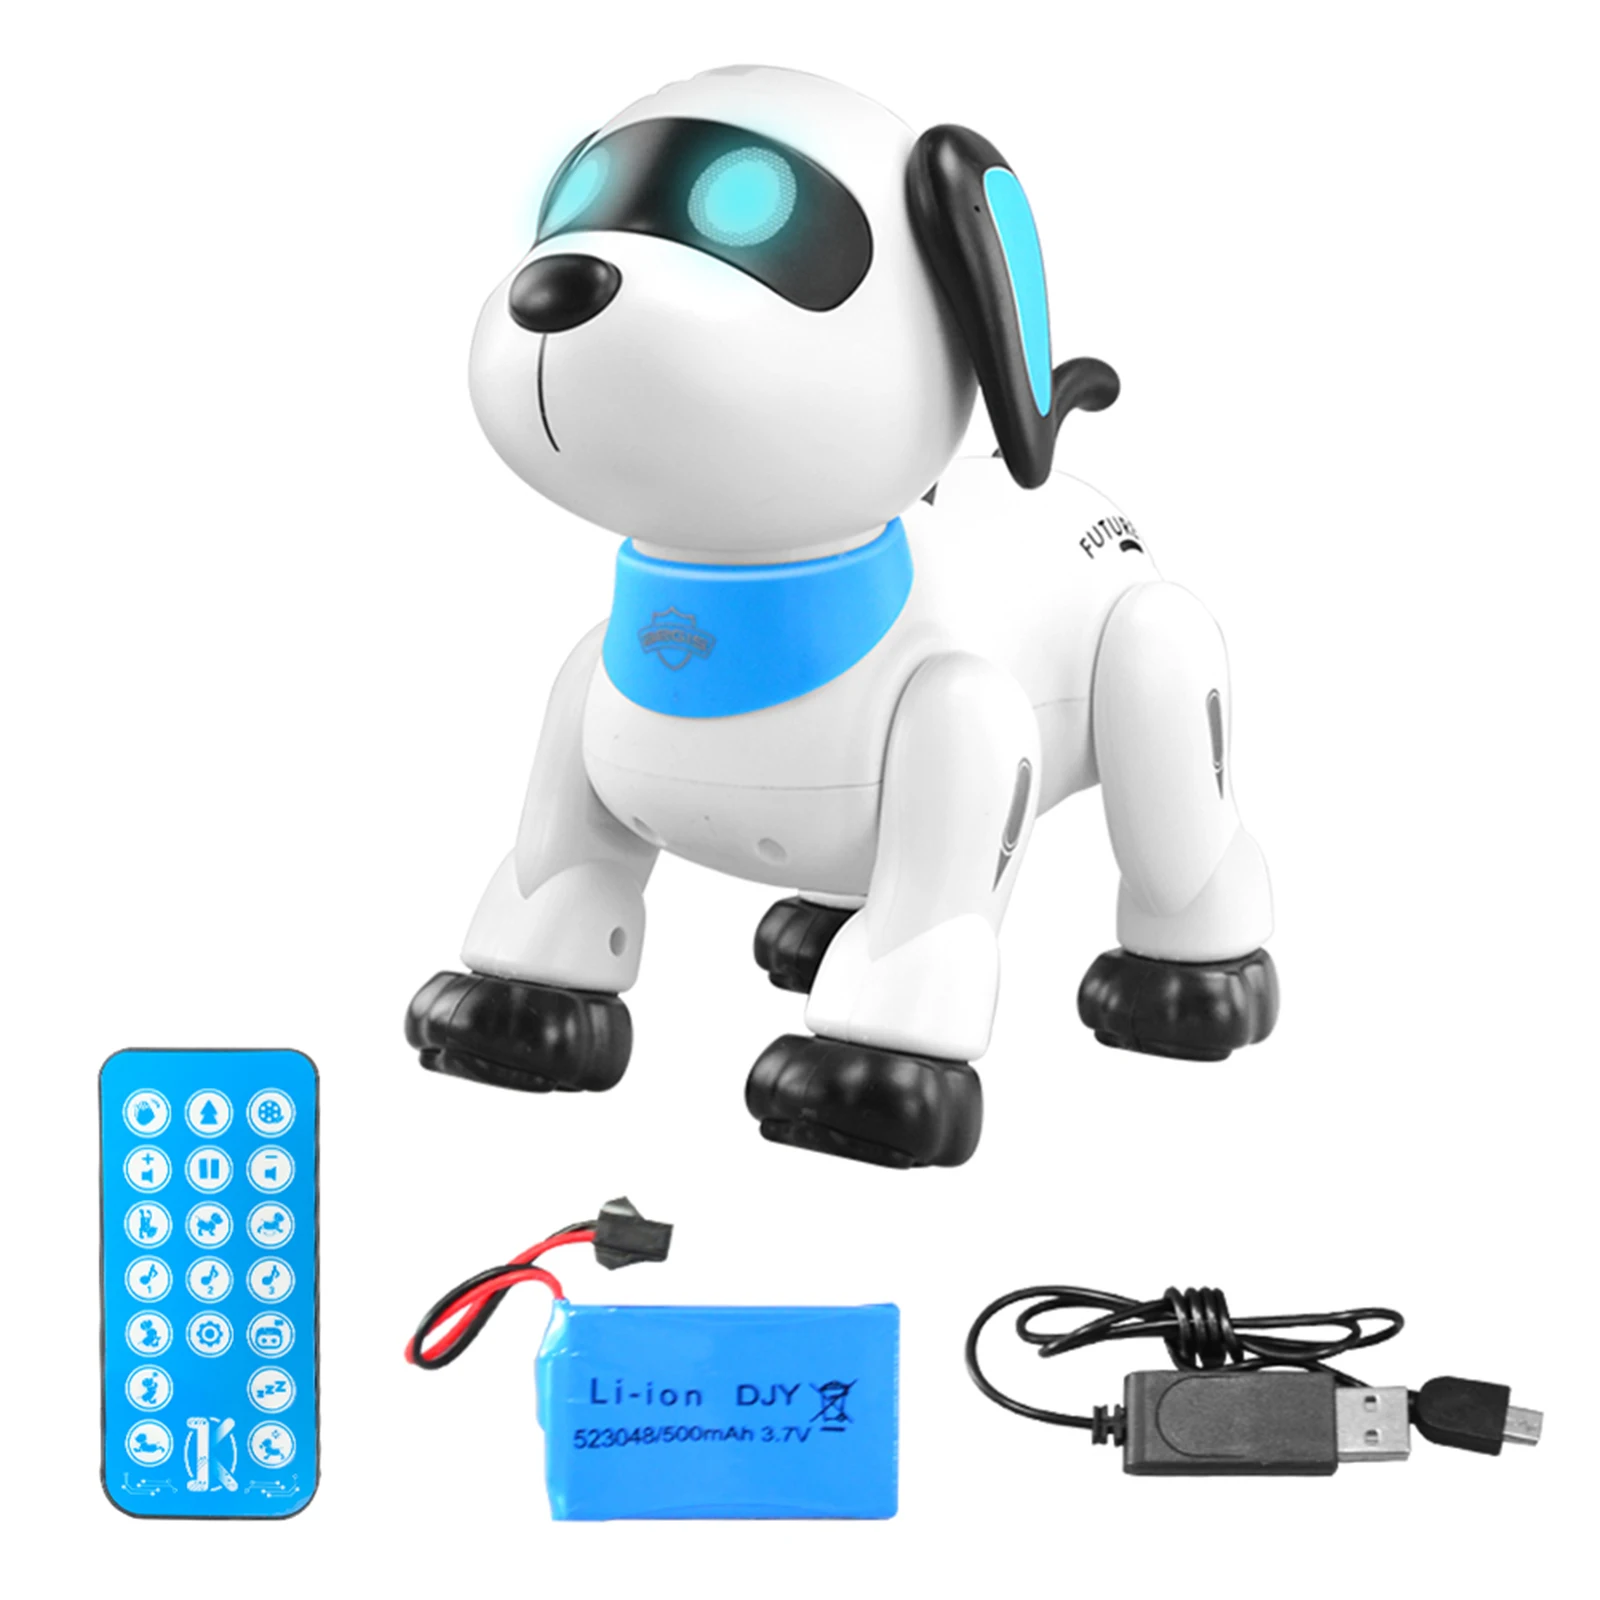 Able gesture sensing rc dancing robot dog with voice app control for boys kids birthday thumb200